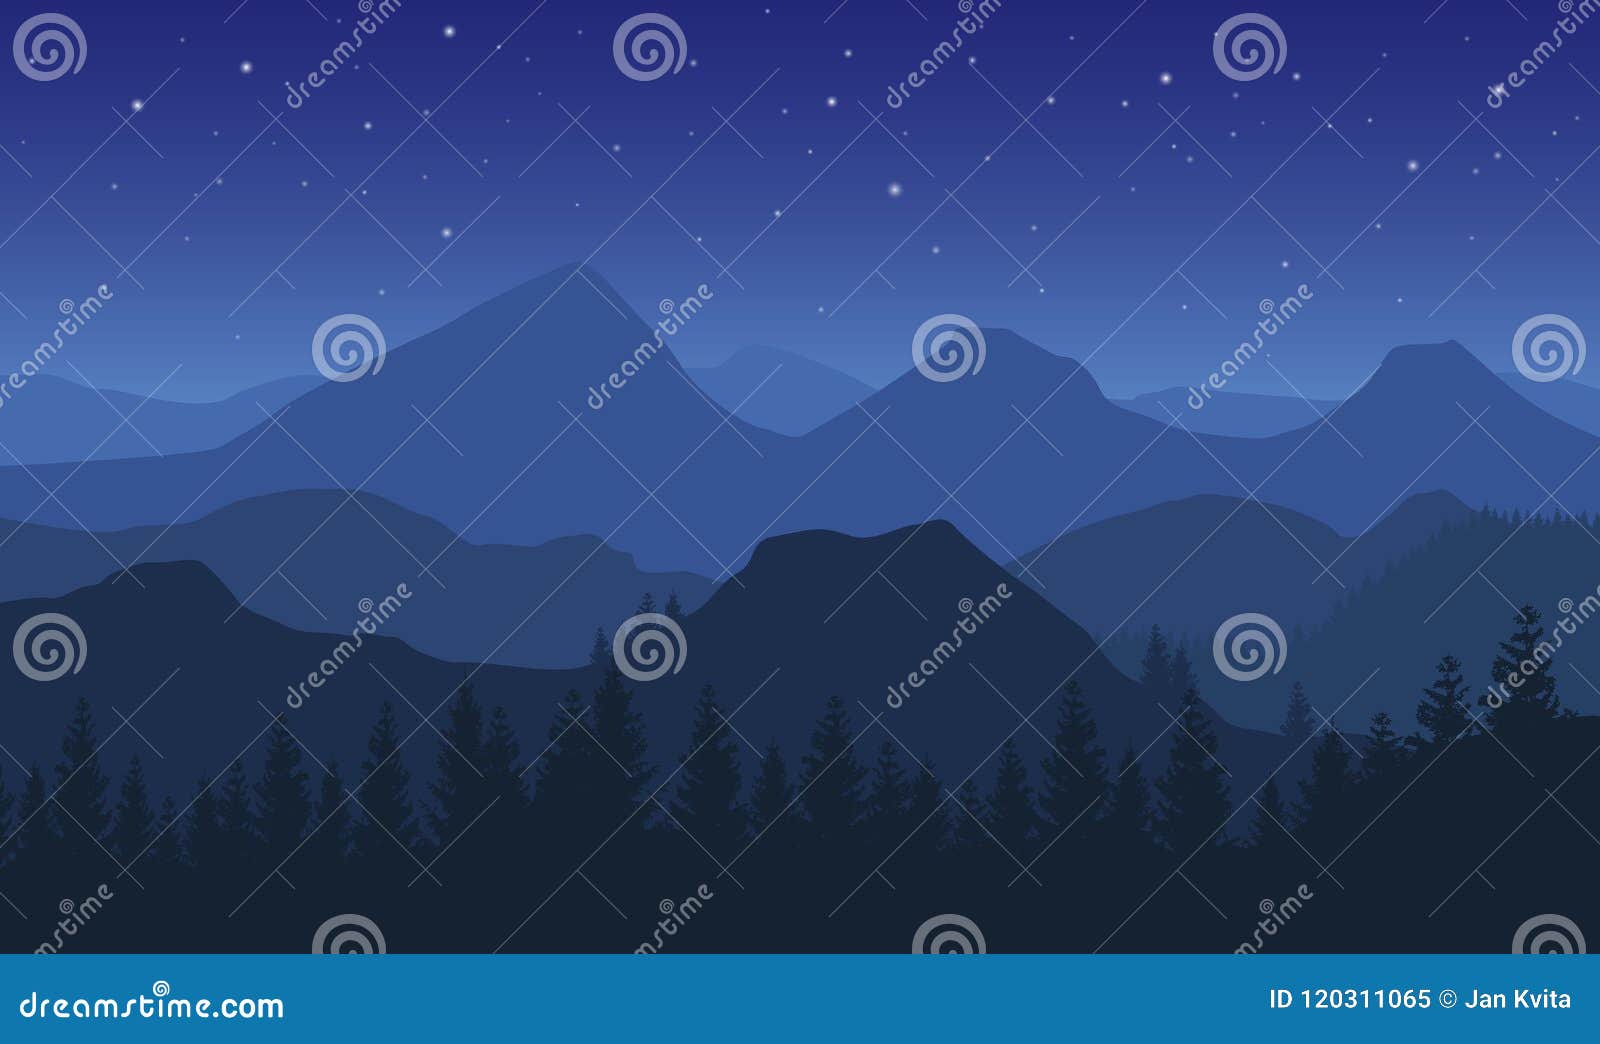 night  landscape with blue misty forested mountains and stars on dark sky.